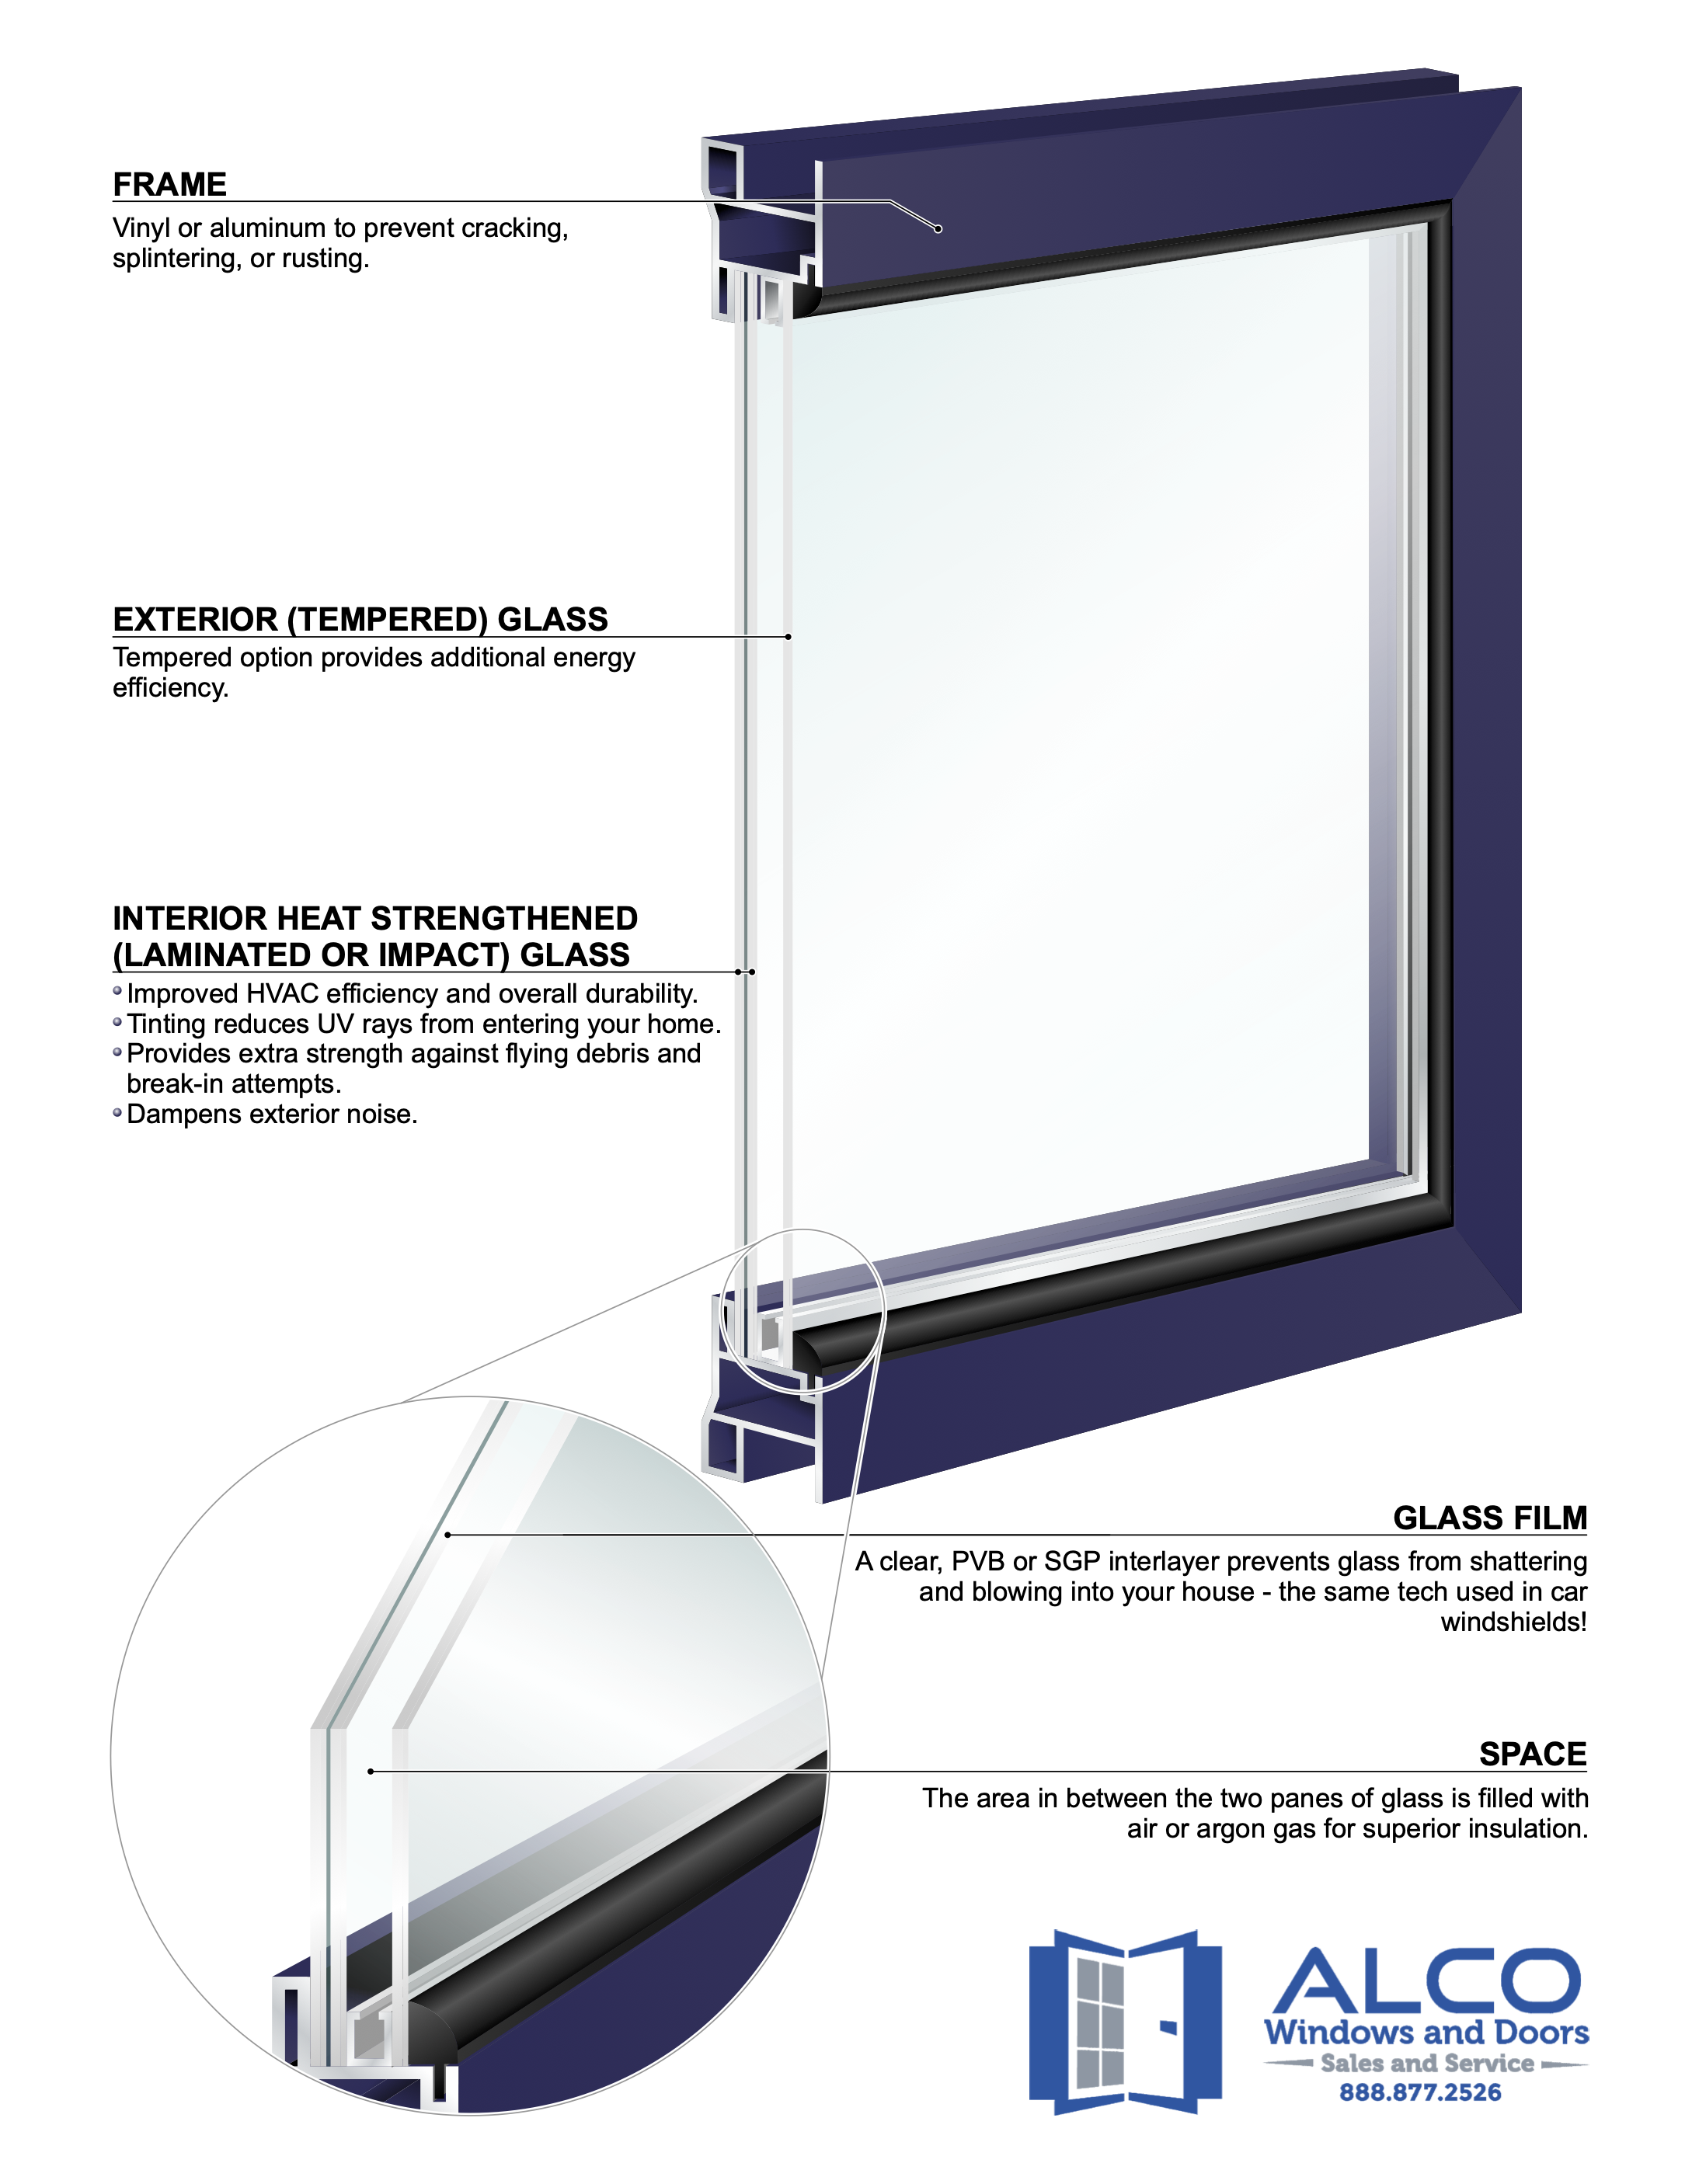 What Is Heat-Resistant Glass And Technical Glass?